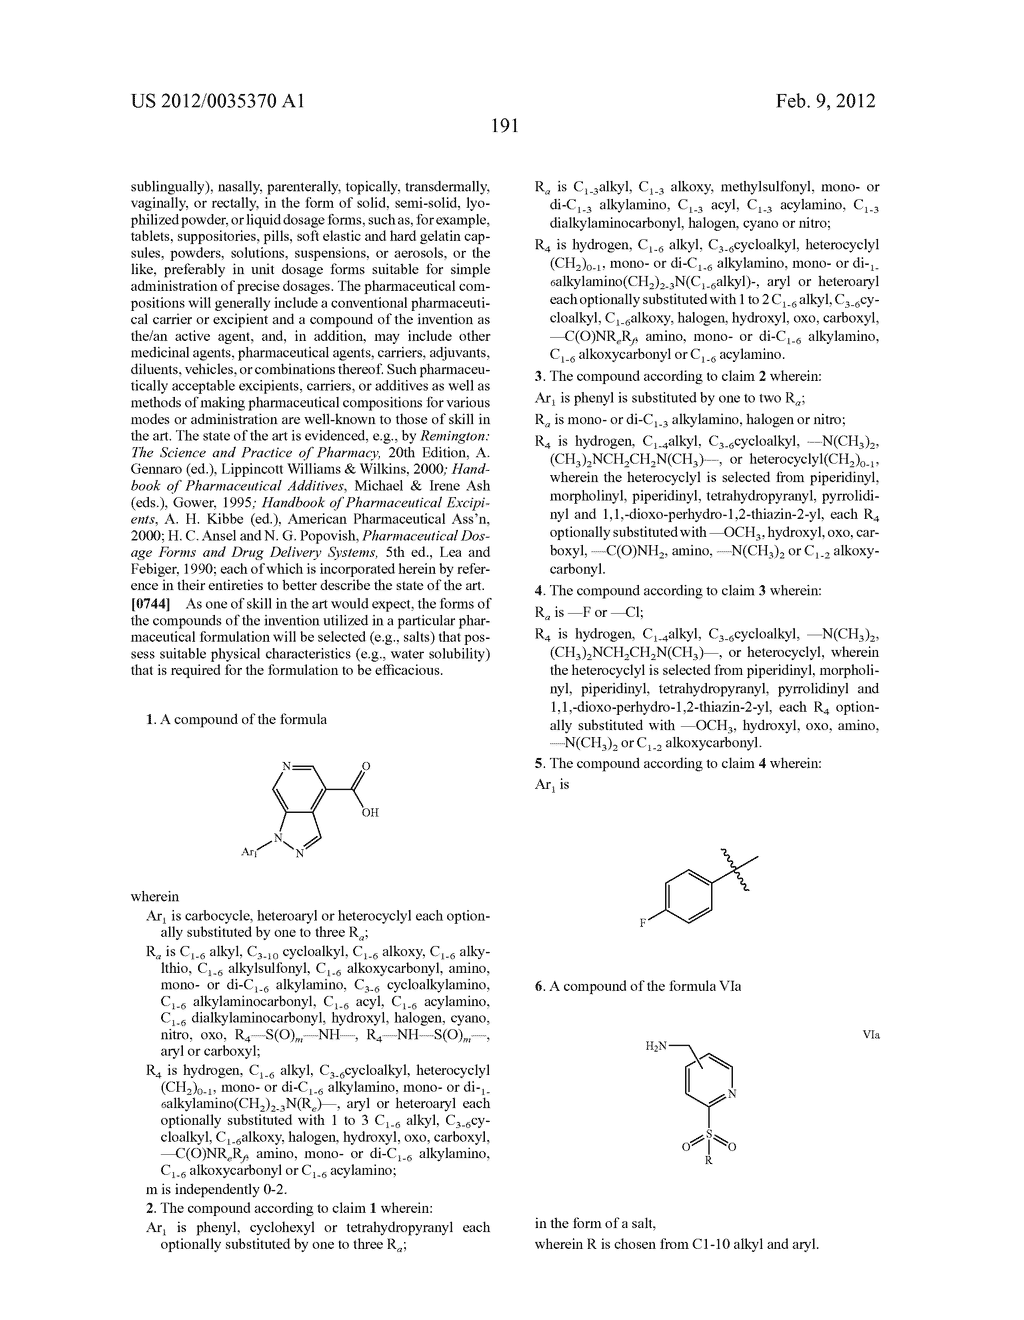 Azaindazole Compounds As CCR1 Receptor Antagonists - diagram, schematic, and image 192